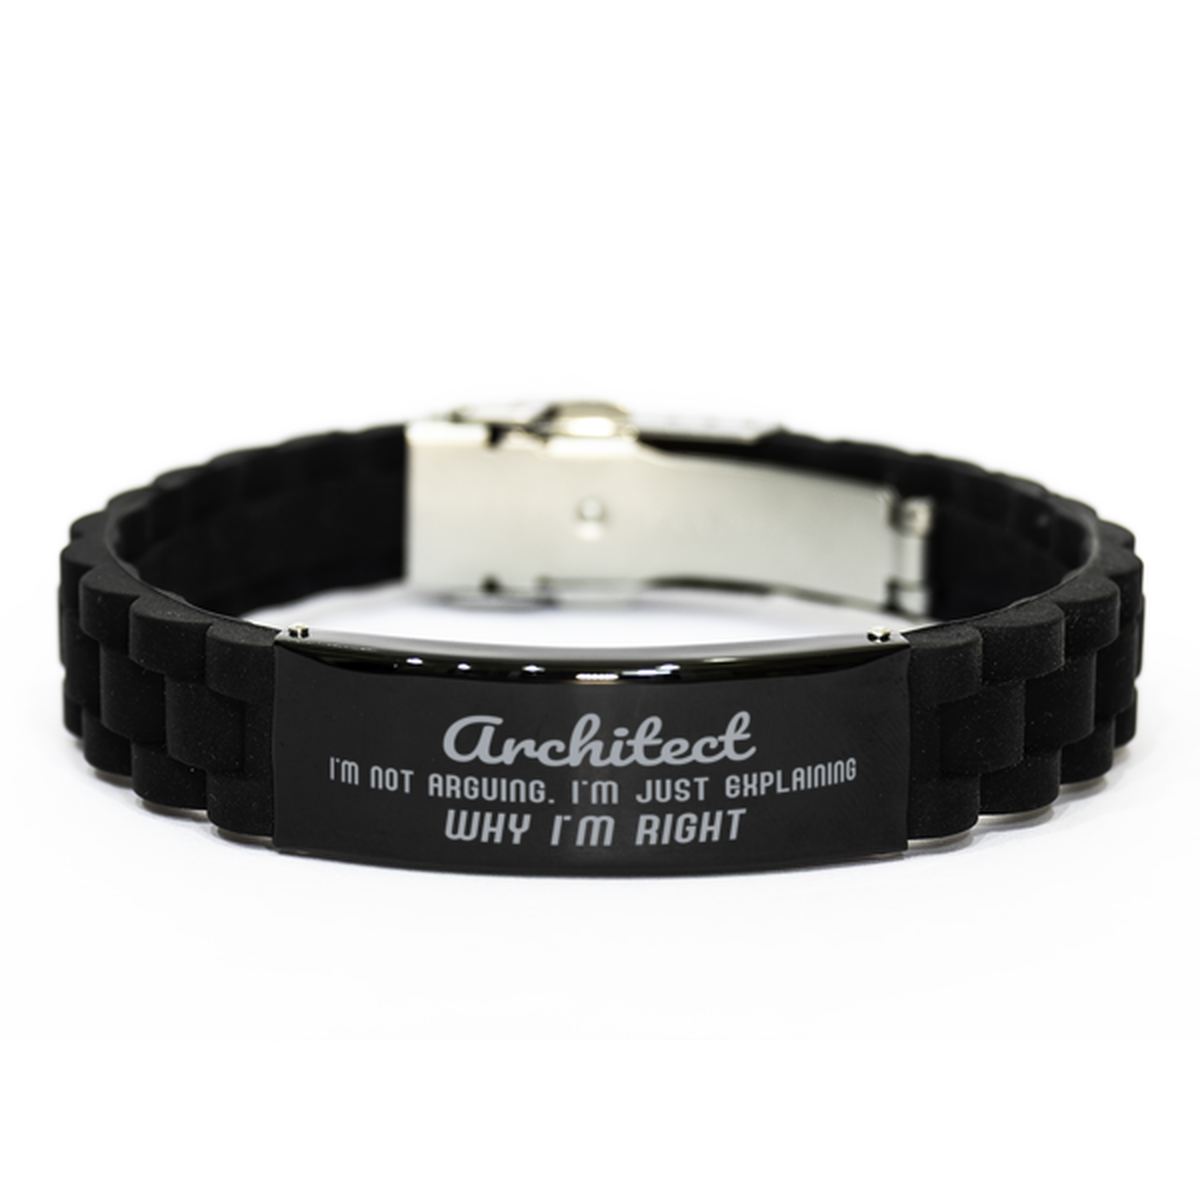 Architect I'm not Arguing. I'm Just Explaining Why I'm RIGHT Black Glidelock Clasp Bracelet, Funny Saying Quote Architect Gifts For Architect Graduation Birthday Christmas Gifts for Men Women Coworker